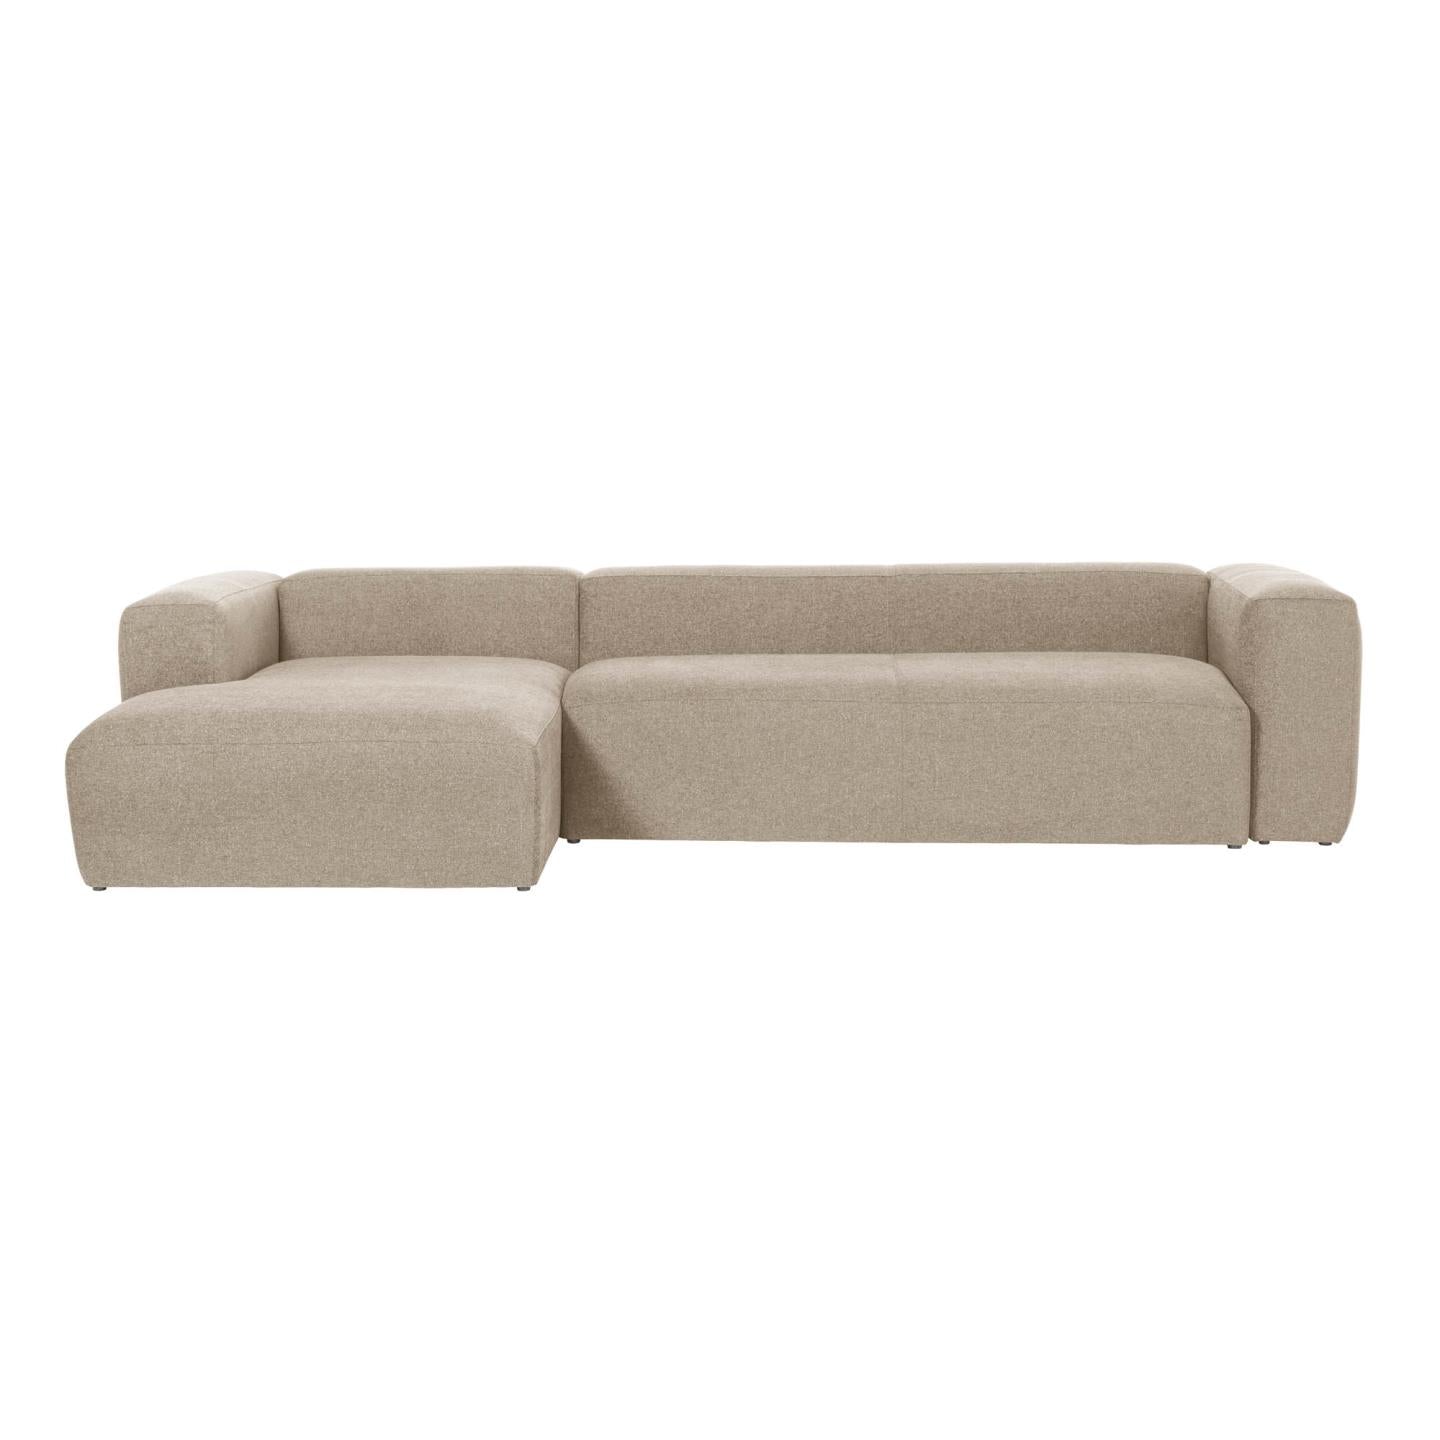 Blok 4 seater sofa with left-hand chaise longue in beige, 330 cm